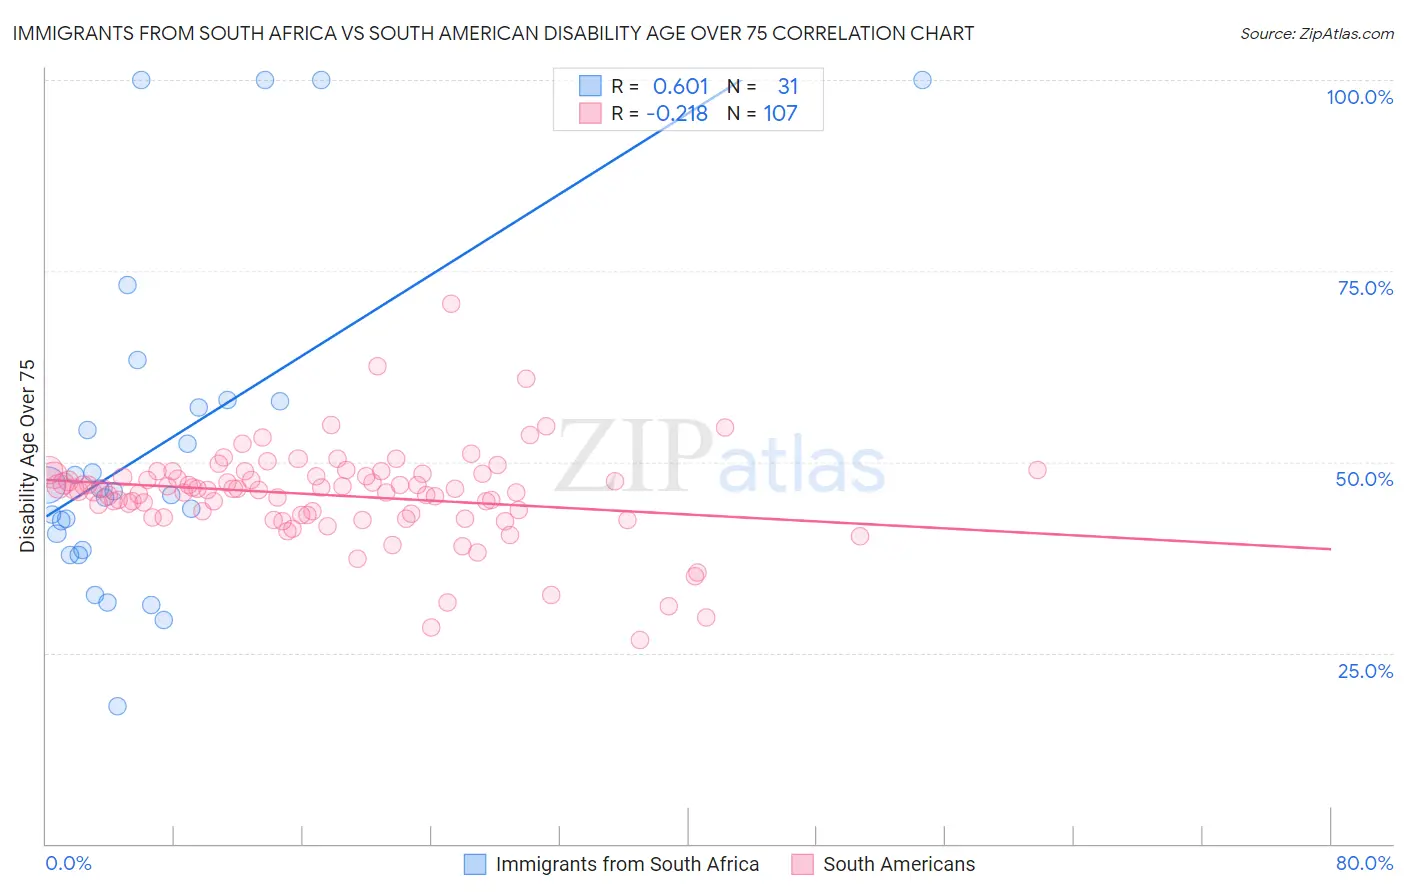 Immigrants from South Africa vs South American Disability Age Over 75